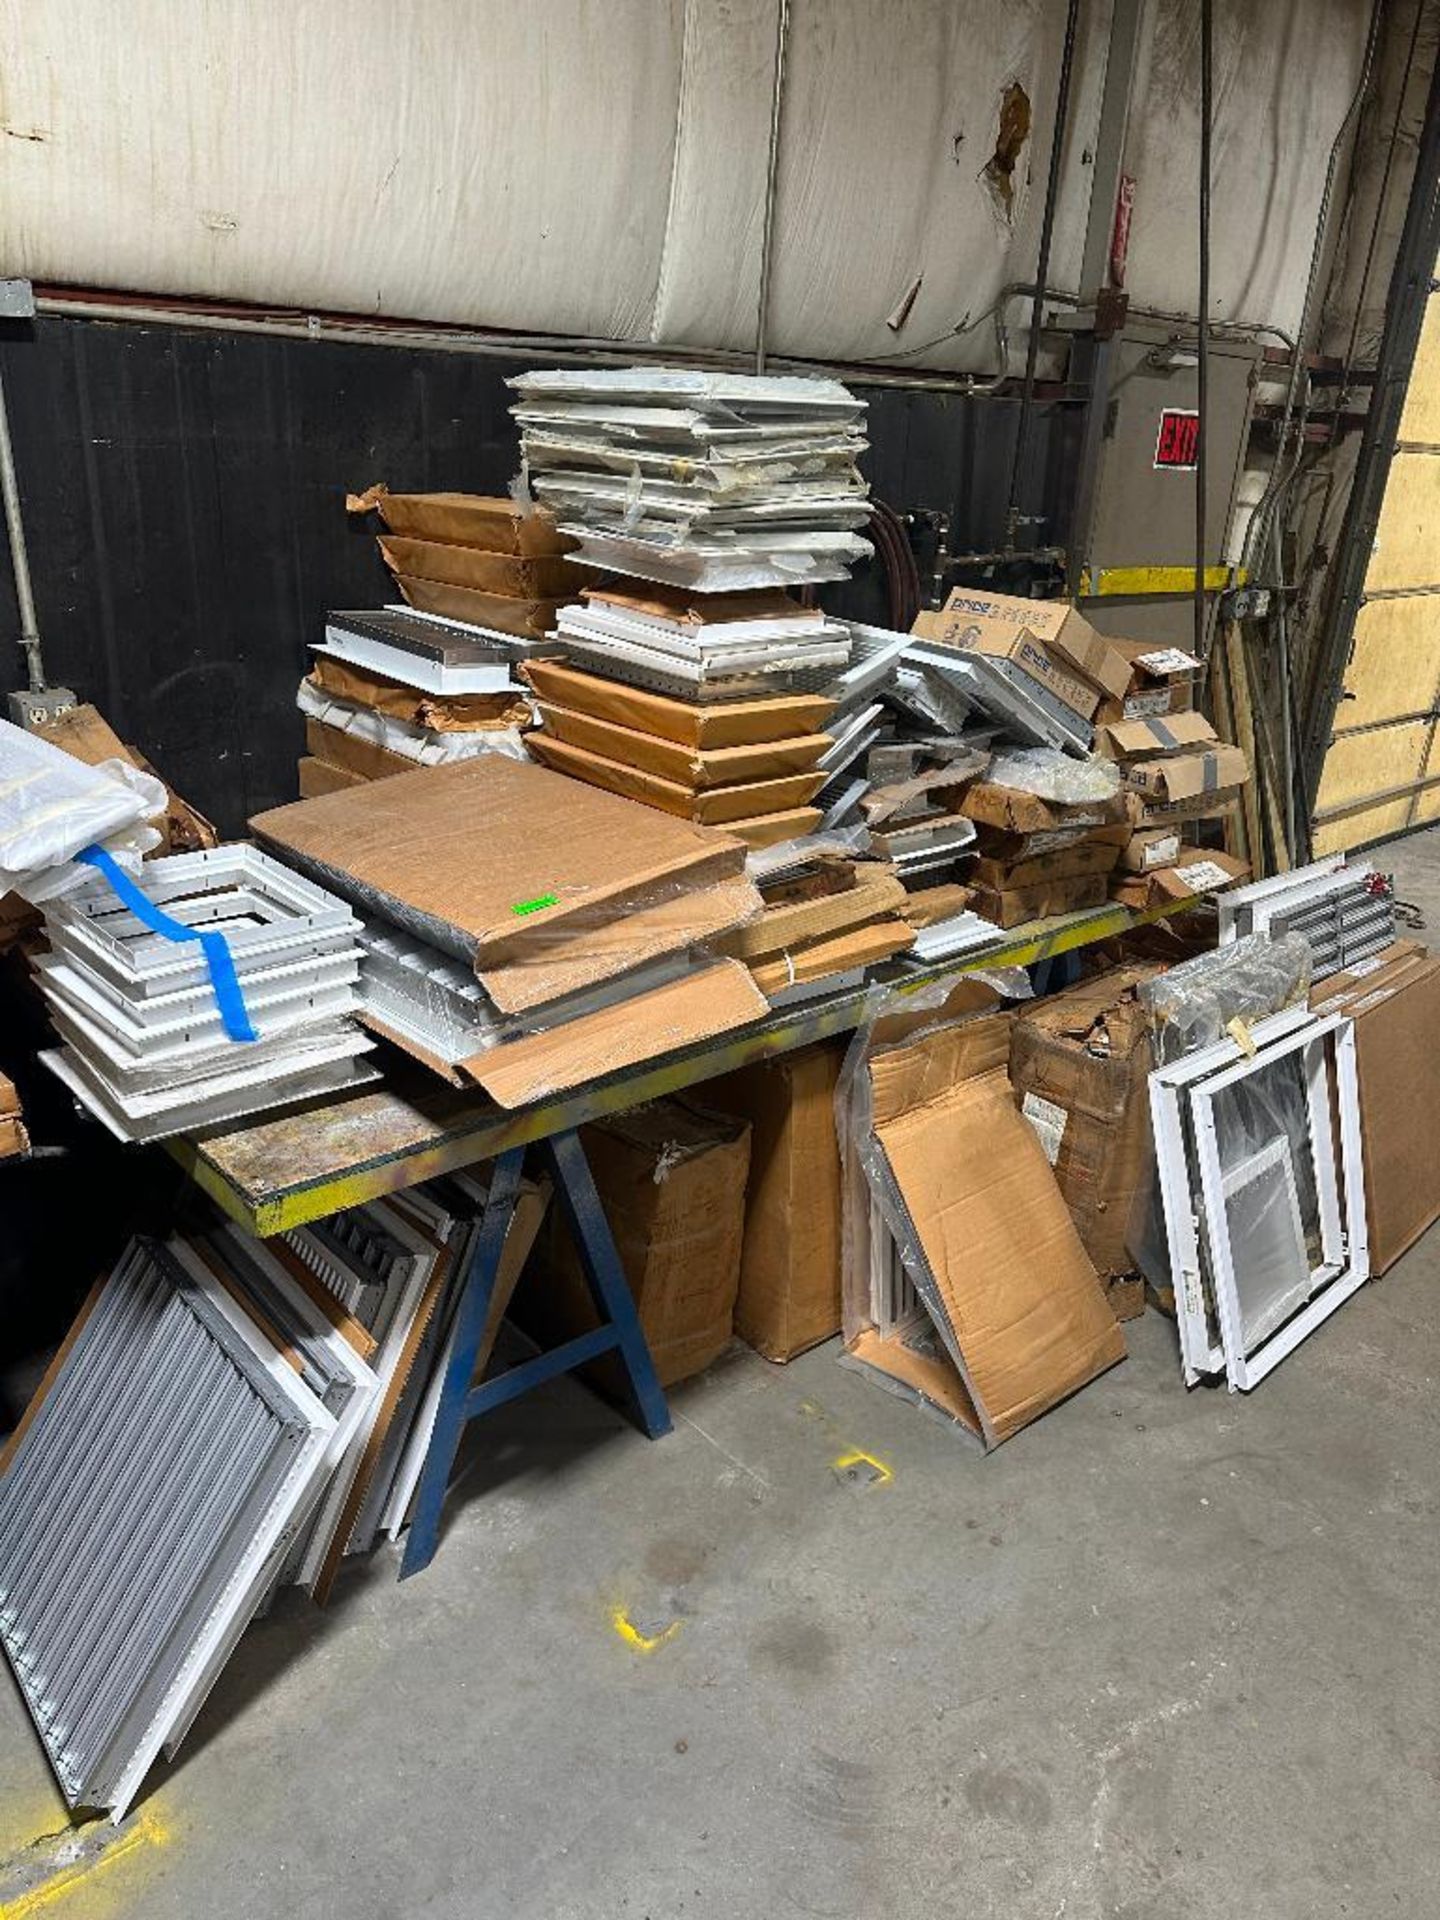 LARGE ASSORTMENT OF REGISTERS, VENT COVERS, AND OTHER HVAC PARTS